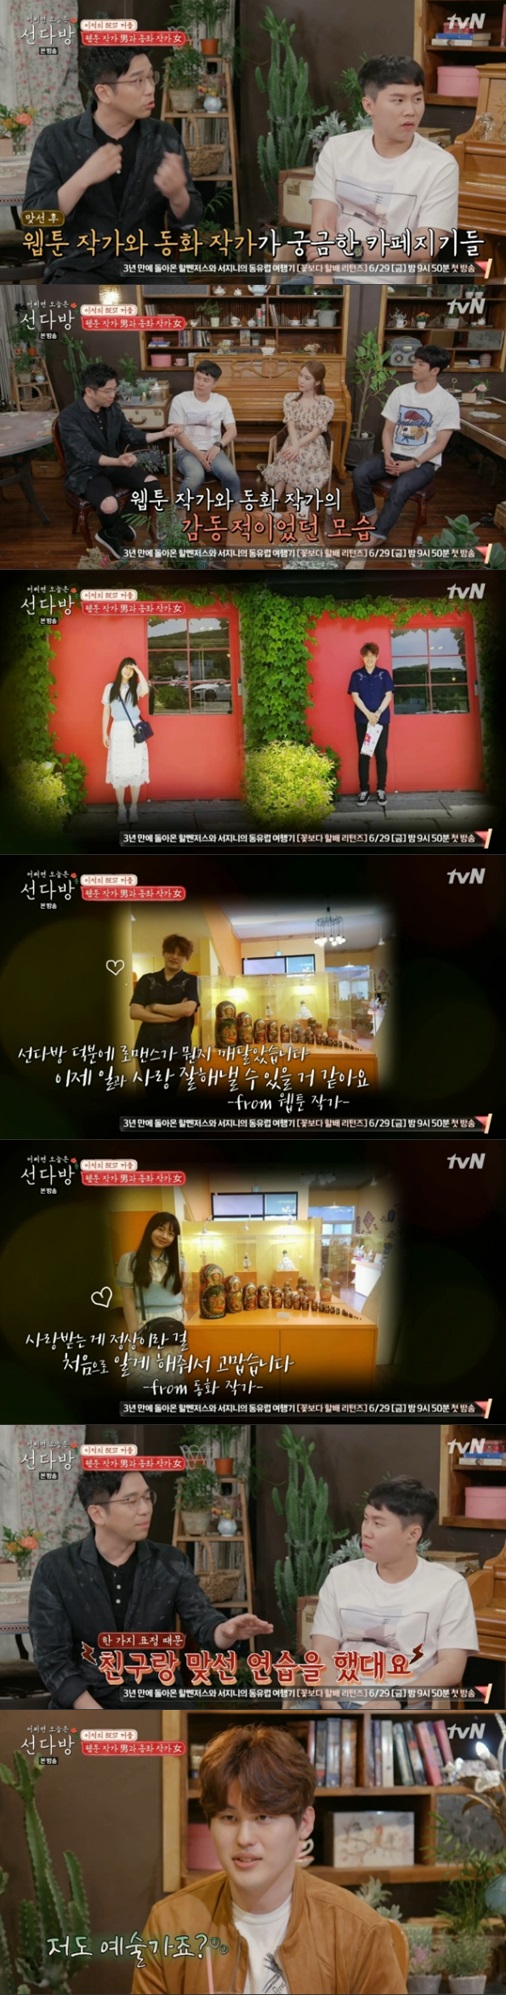 Sun coffee shop cafe reporters remembered the couple who appeared in the fourth episode.On the cable channel tvN Sun coffee shop broadcasted on the night of the 24th, the actor Yoo In-na, SF9 Roone, singer Lee Juck, and comedian Yang Se-hyeong were portrayed.Lee Juck cited the 7th male and female webtoon writer and Fairy tale writer who appeared in the fourth episode as a memorable man and woman.At that time, the appearance of a webtoon writer who showed a straight line while showing a straight line was applauded by many people.Since then, they have been in a relationship. They have also posted photos of their dates on social media.Fairytale wrote to the Sun Coffee shop, Thank you for letting me know for the first time that it is normal to be loved.Webtoon writer also said, Thanks to Sun coffee shop, I realized what romance is, and now I think I can do both work and love well.Yang Se-hyeong said, At that time, I practiced against my friend because he was nervous and made a mistake. I actually think it is right to show a nervousness when I am nervous.